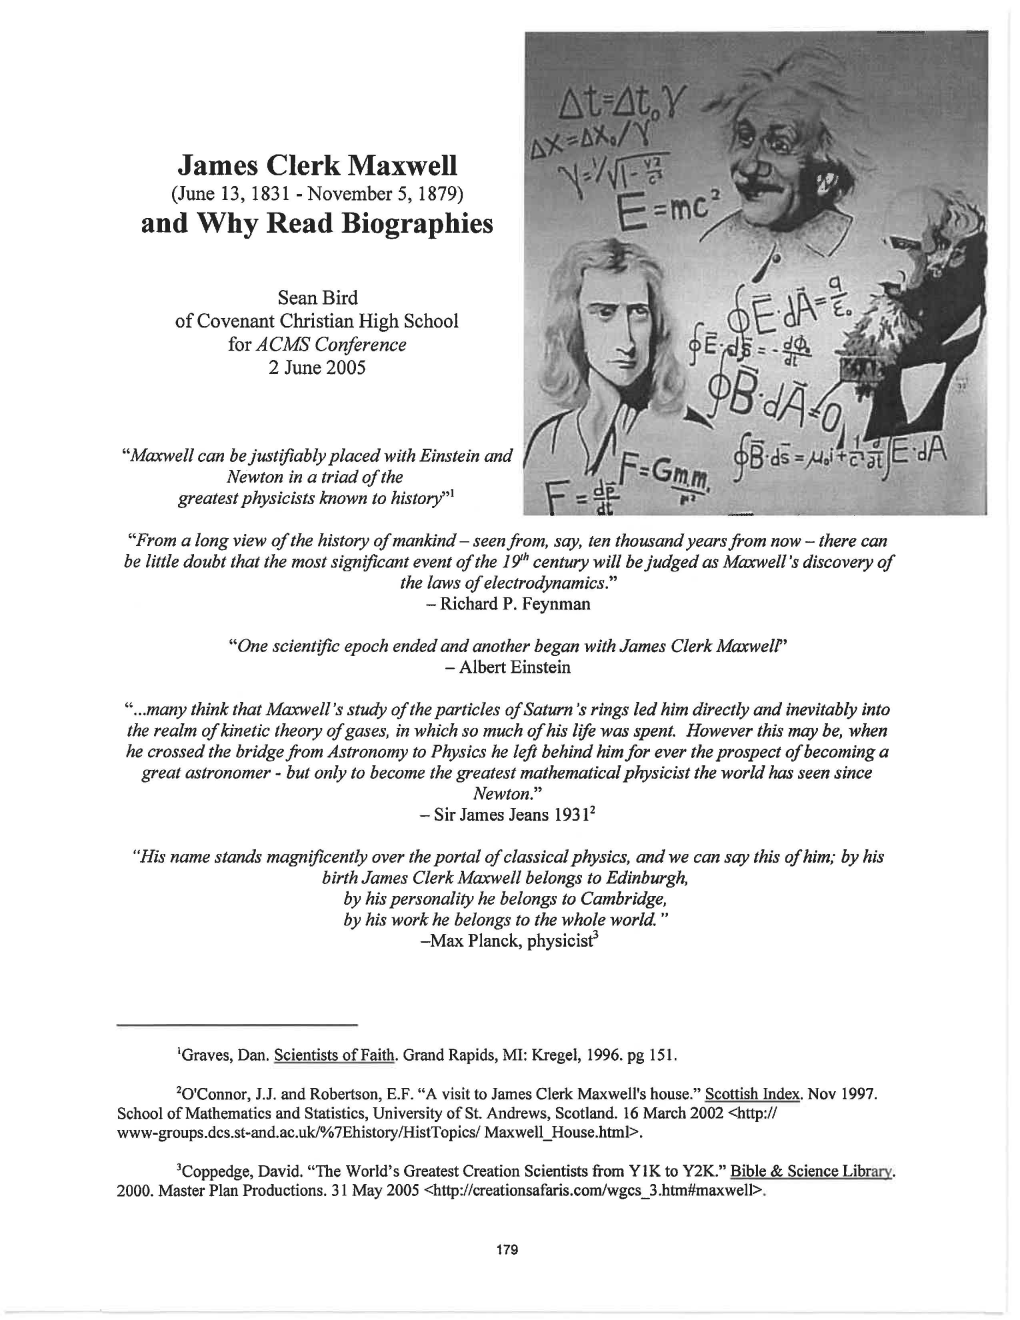 James Clerk Maxwell and Why Read Biographies